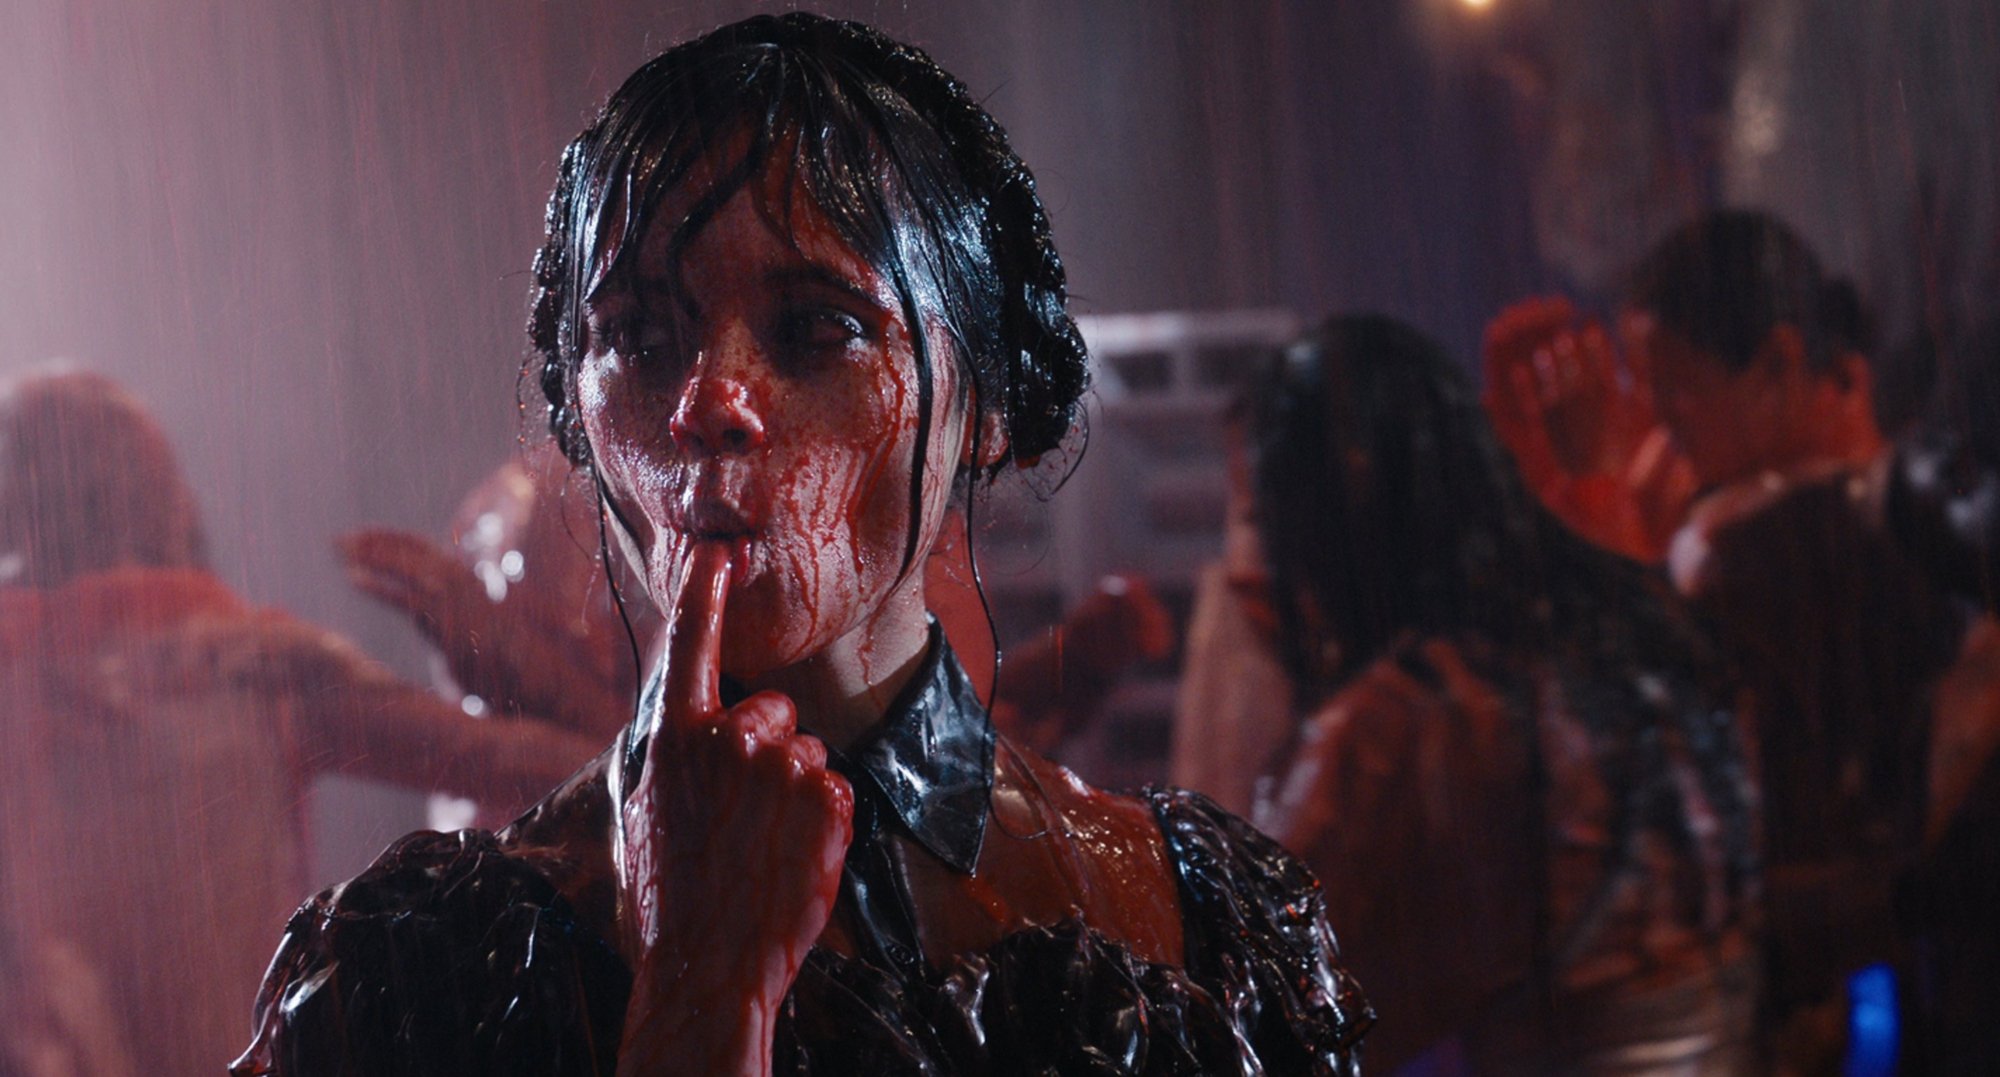 Jenna Ortega as Wednesday Addams covered in blood at the Rave'N in 'Wednesday.'